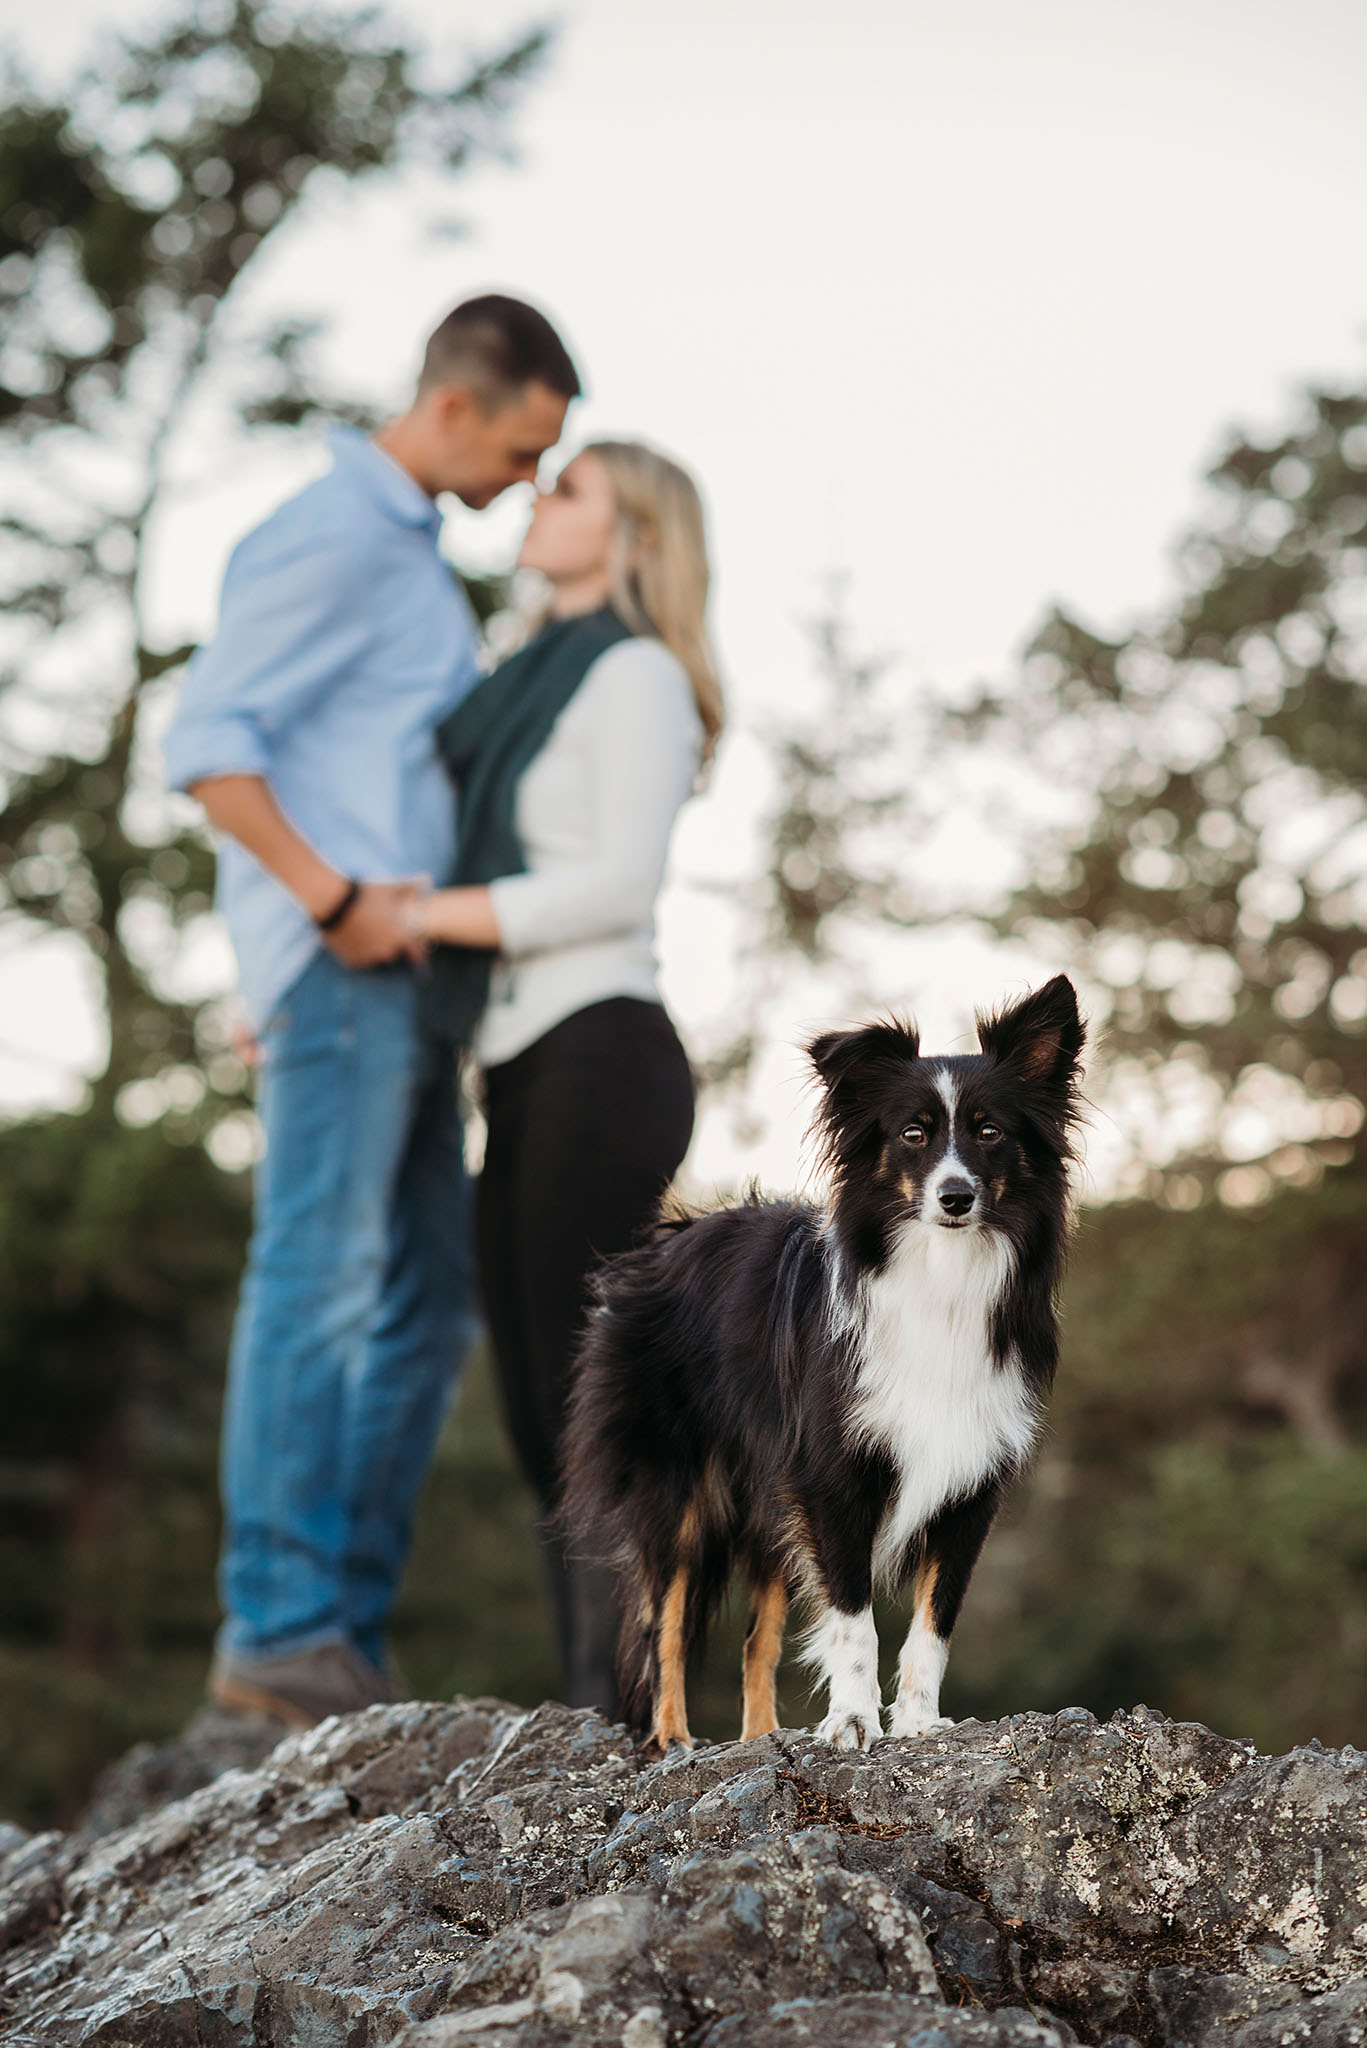 Sunset west coast engagement session with dog at East Sooke Park near Victoria, BC.